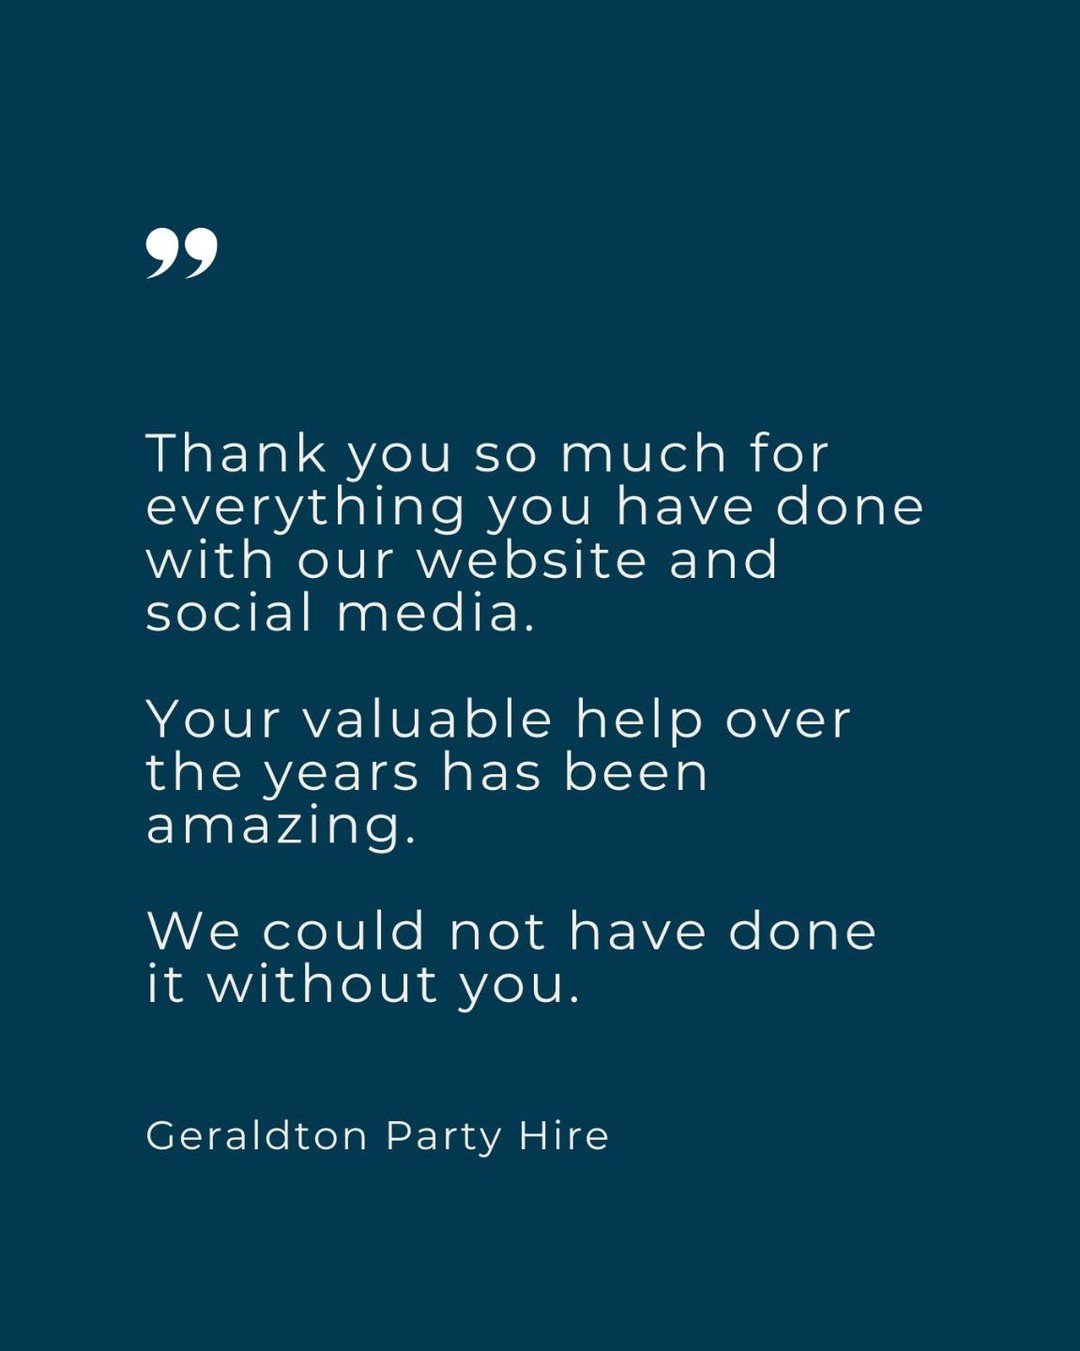 Kind words 🤍 

We're committed to building long-term relationships with our clients. Getting to know you and your business is at the heart of what we do, so we can deliver customised marketing solutions tailored to your unique needs.